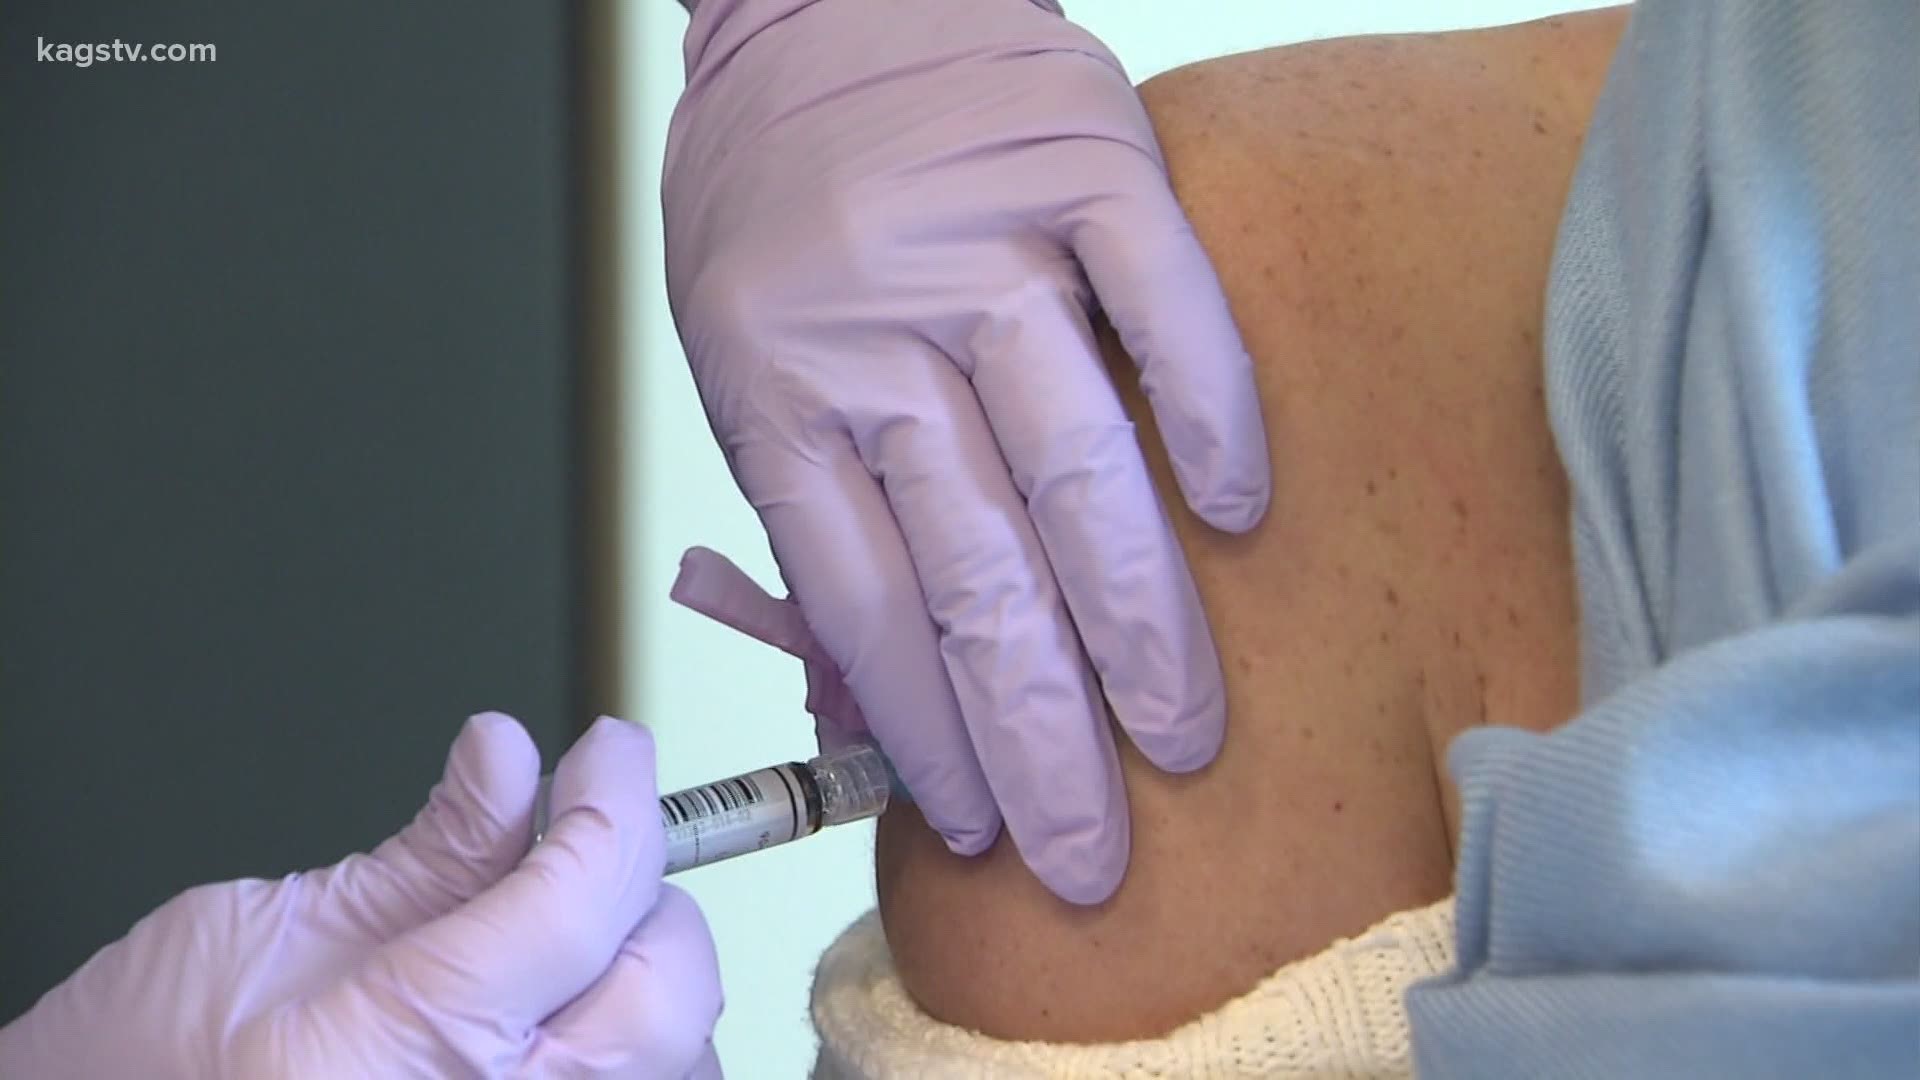 Local health experts say to get your flu shot now